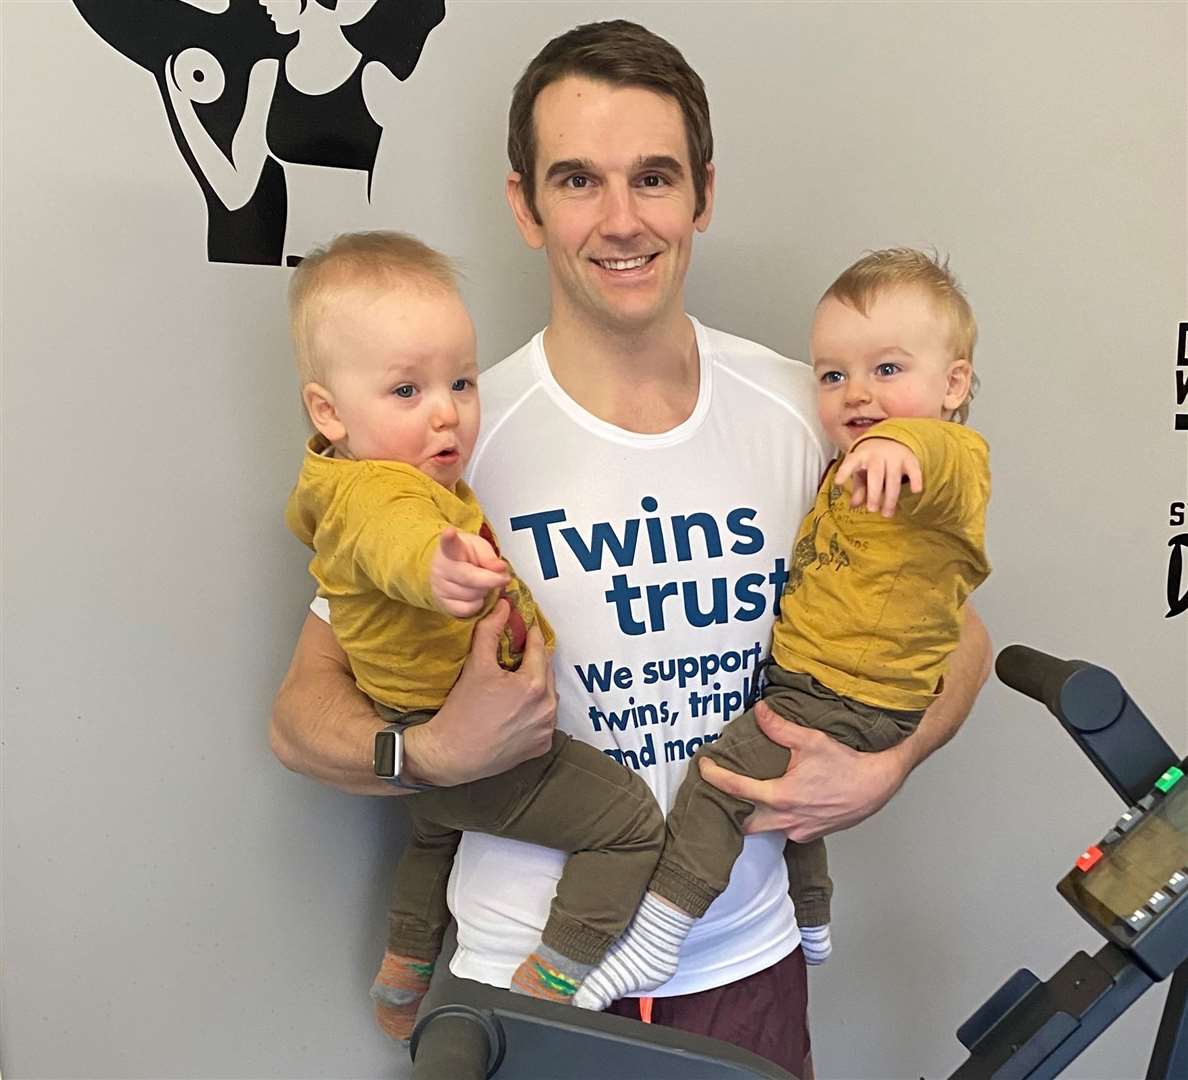 Richard Hayward is taking on the challenge after the birth of sons George and Freddie in late 2019